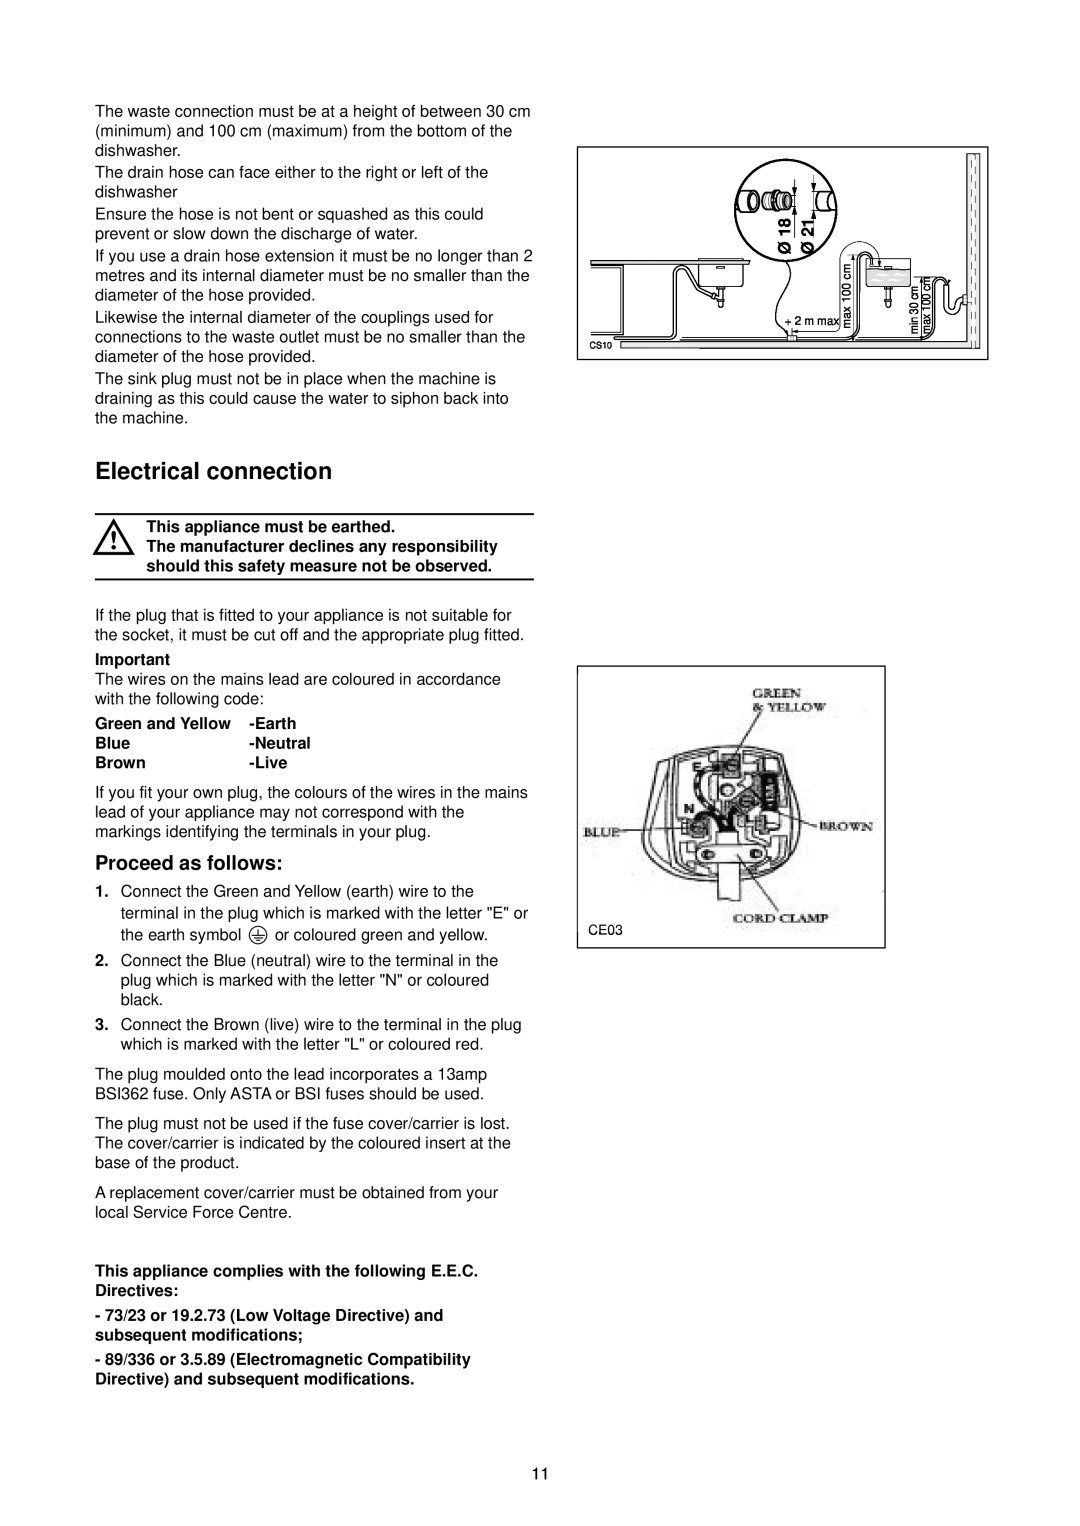 Zanussi DA 6152 Electrical connection, Proceed as follows, This appliance must be earthed, Earth, Blue, Brown, Live, CE03 